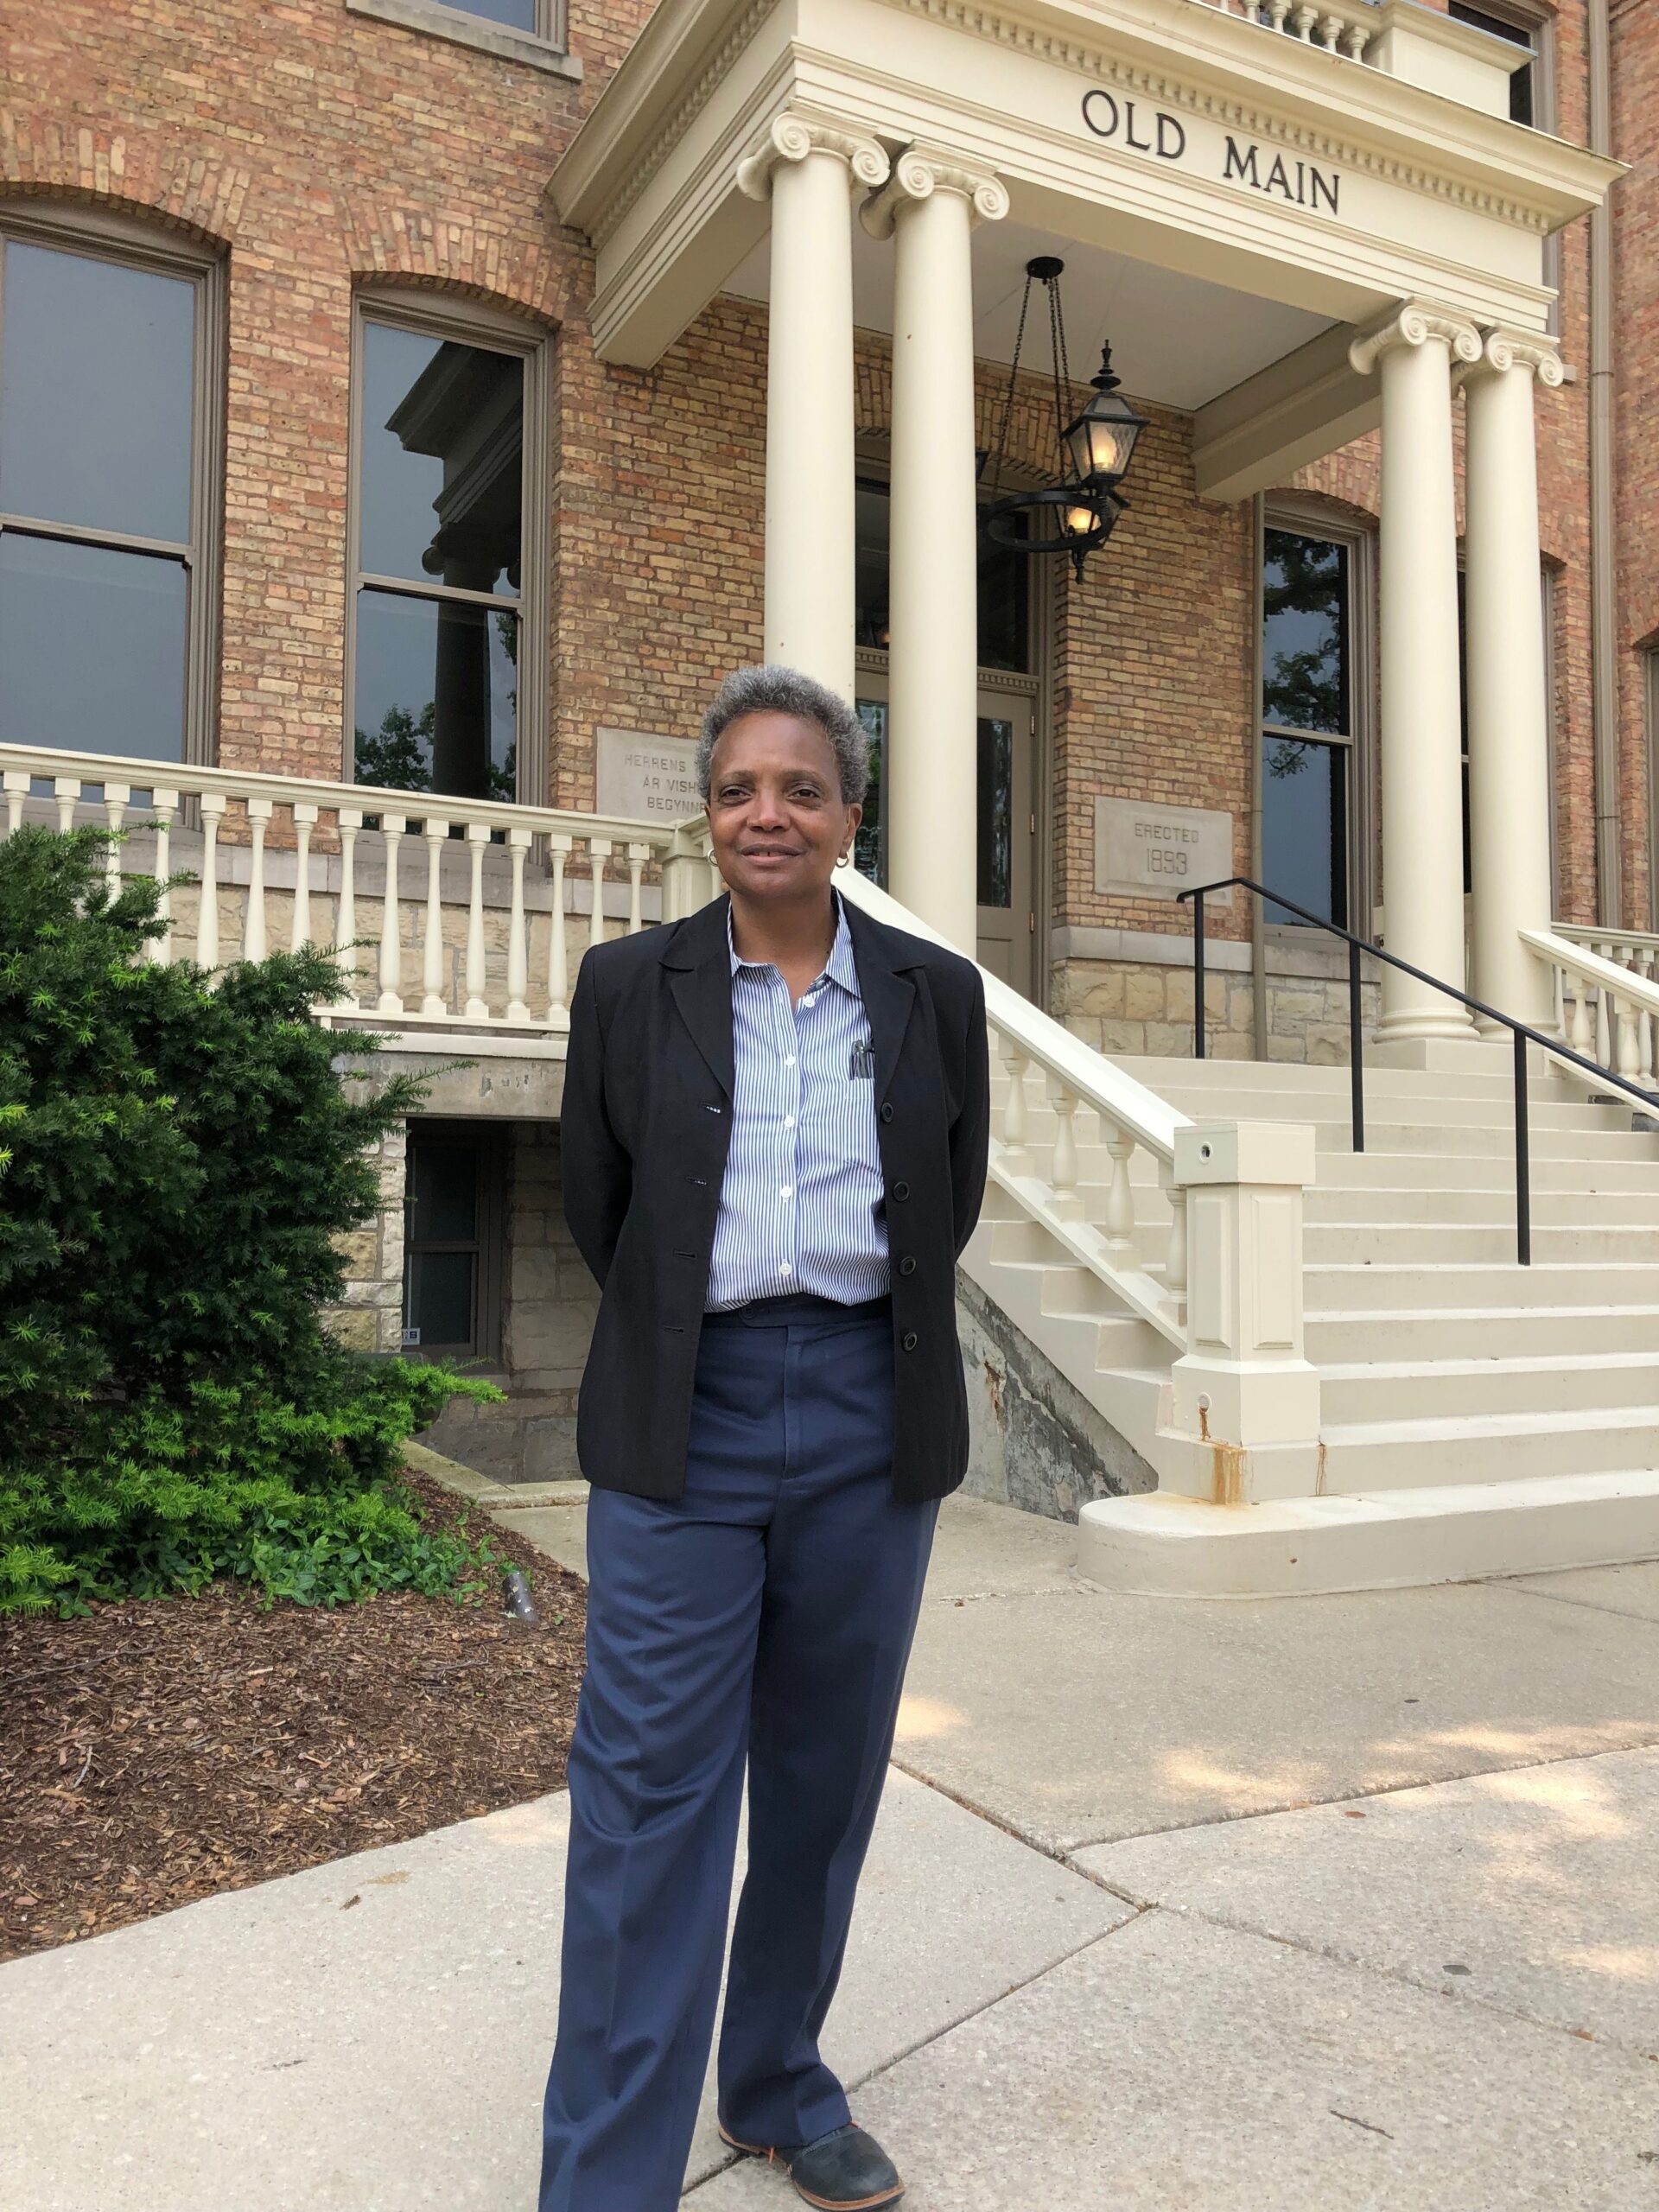 Mayor Lightfoot stands in front of Old Main building